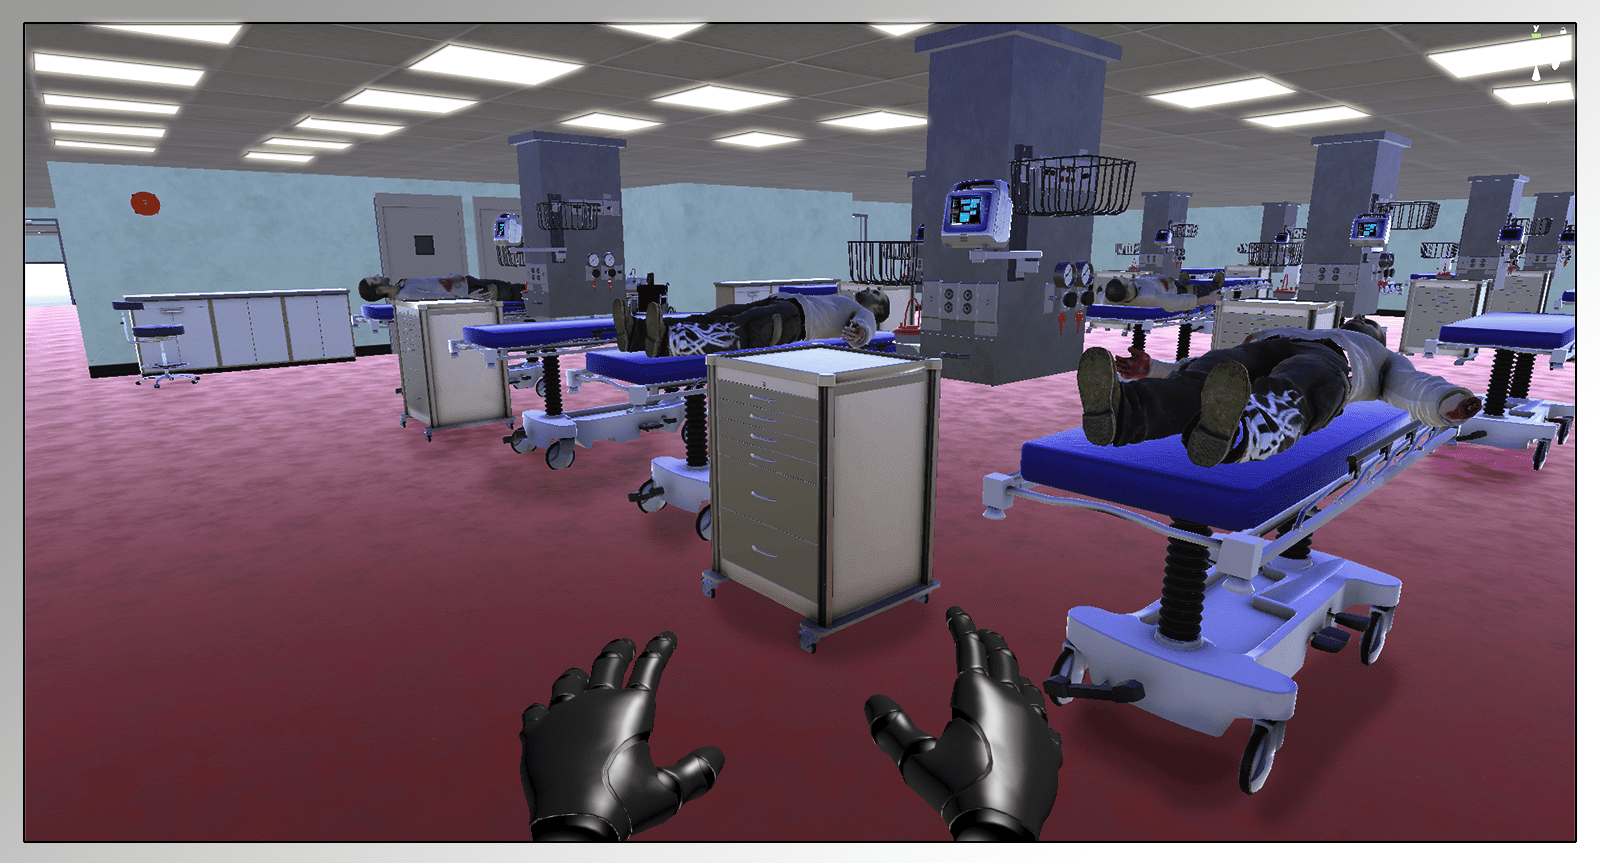 Image of medical devices and hospital environment for training and operations analysis